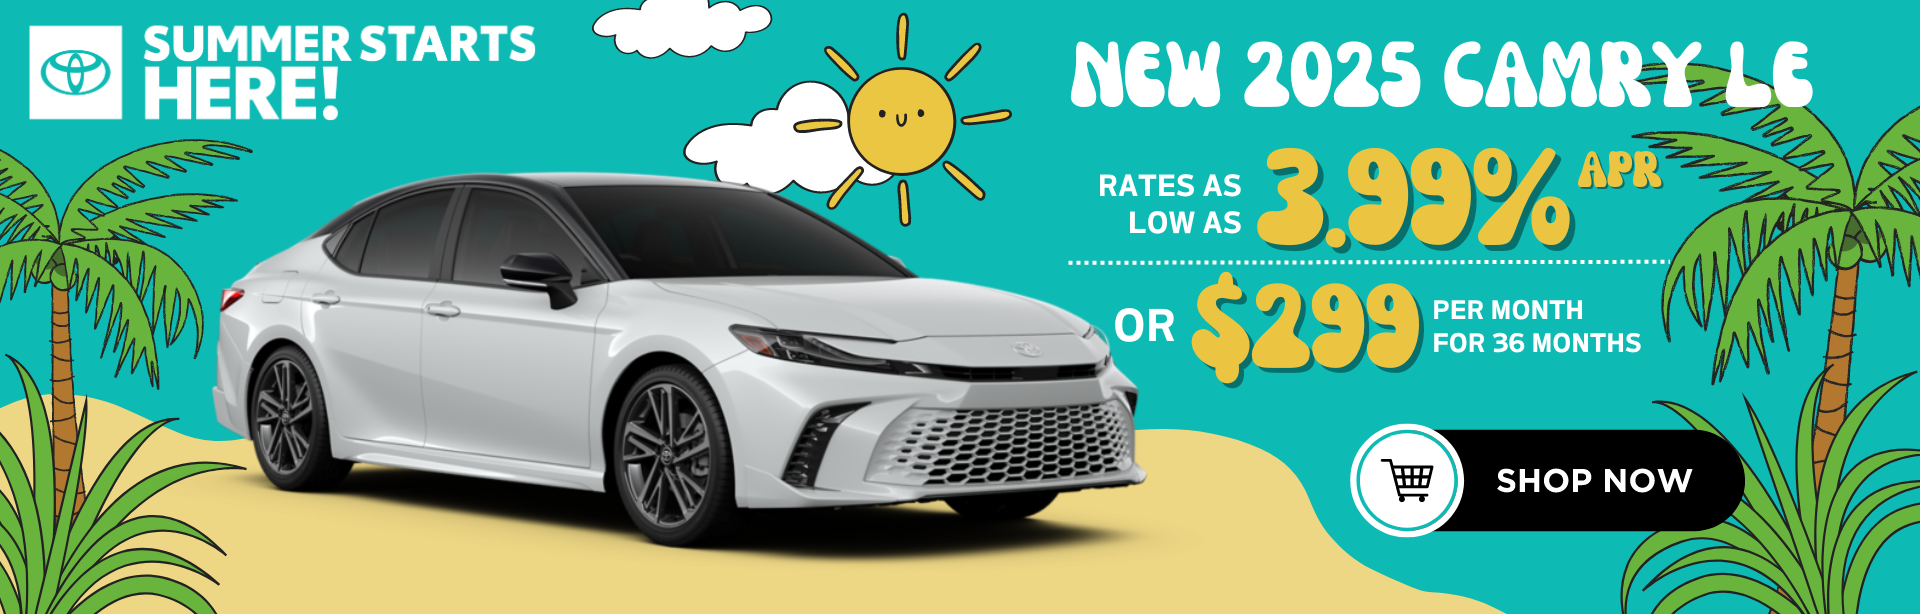 2025 Camry Offer